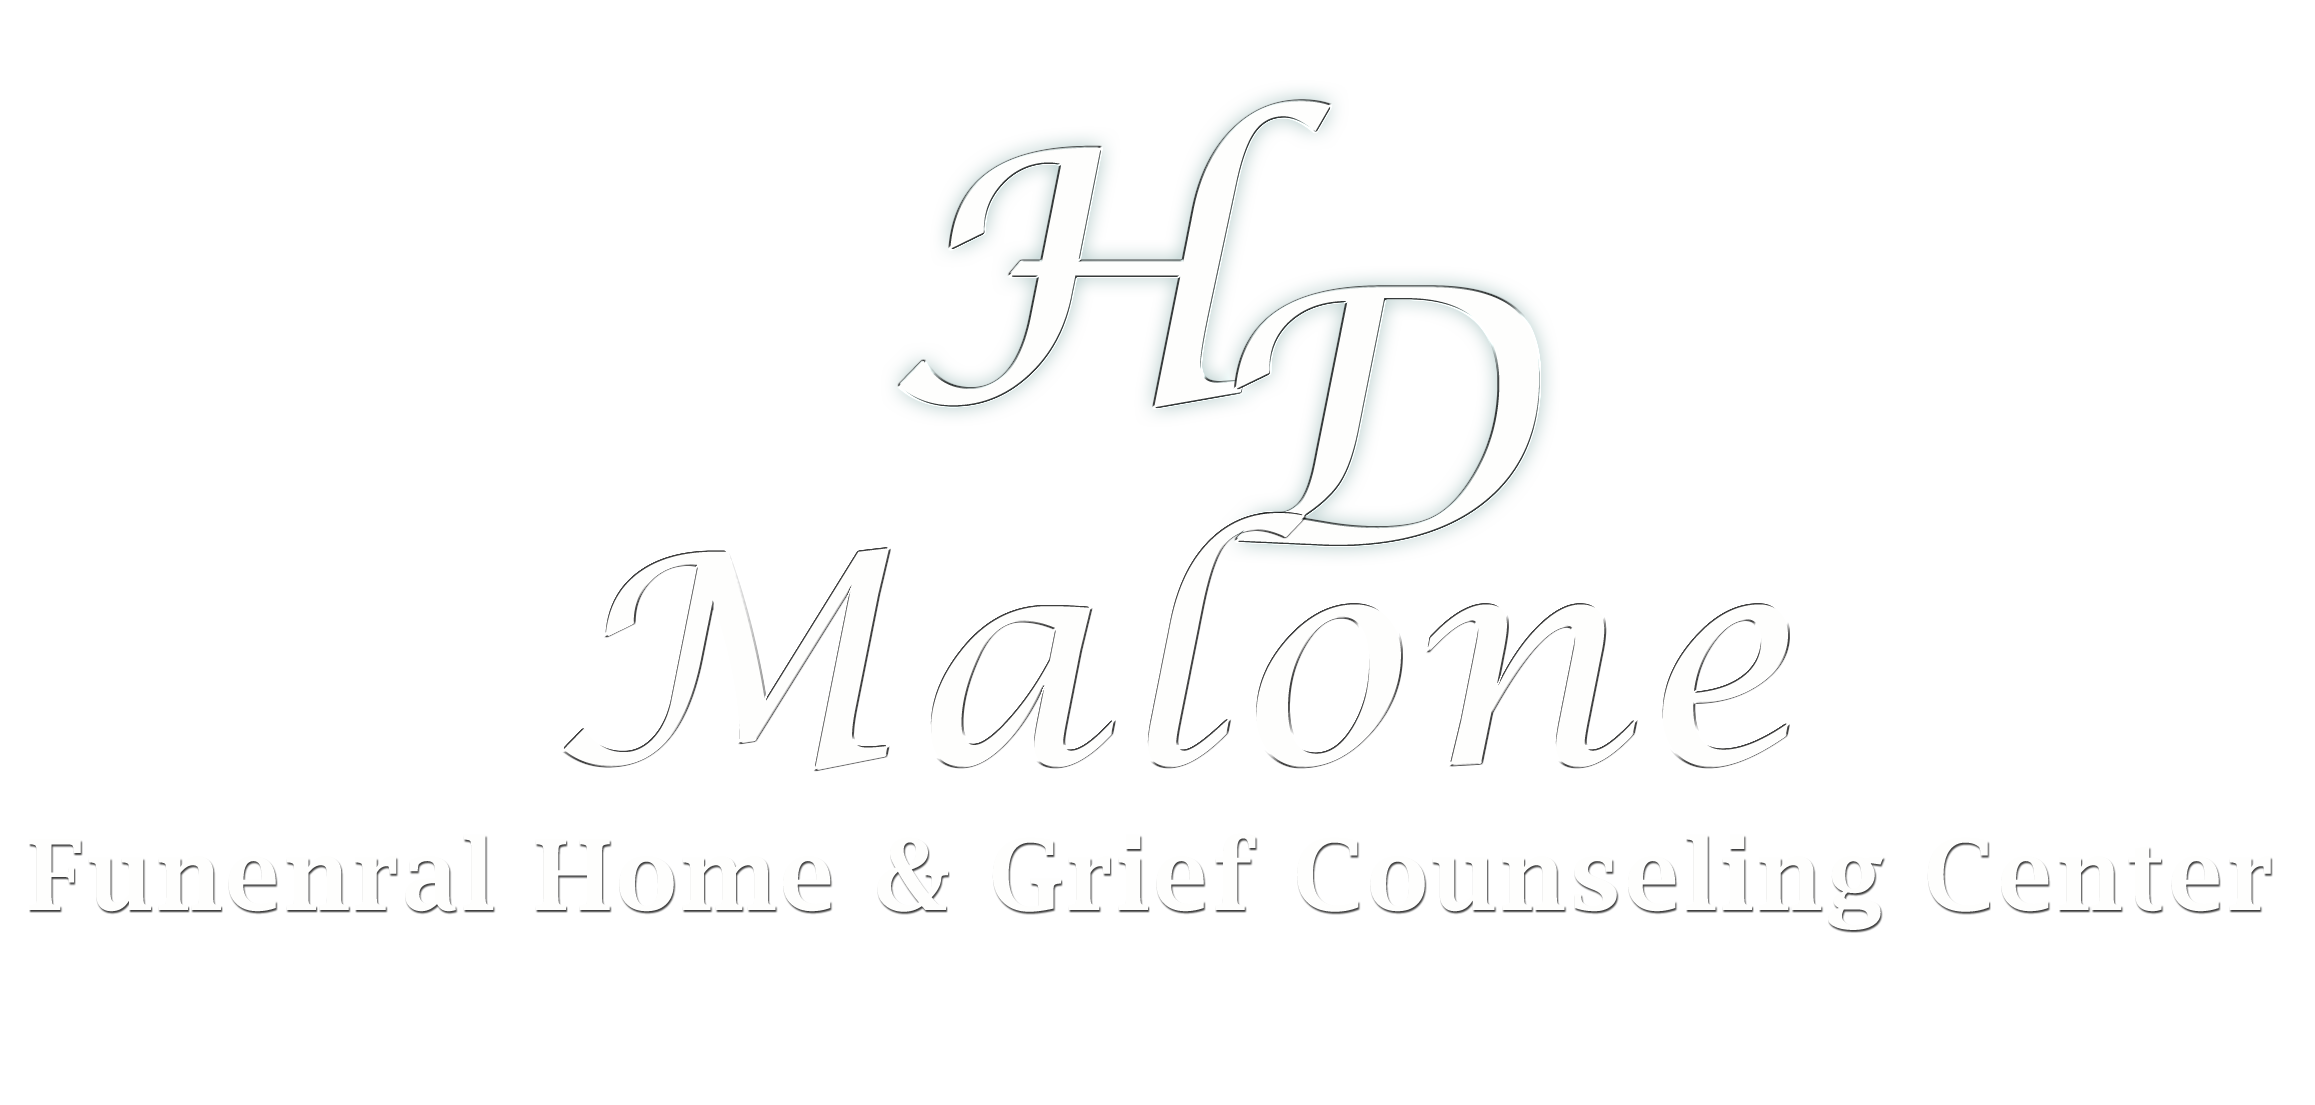 HD Malone Funeral Home & Grief Counseling Center